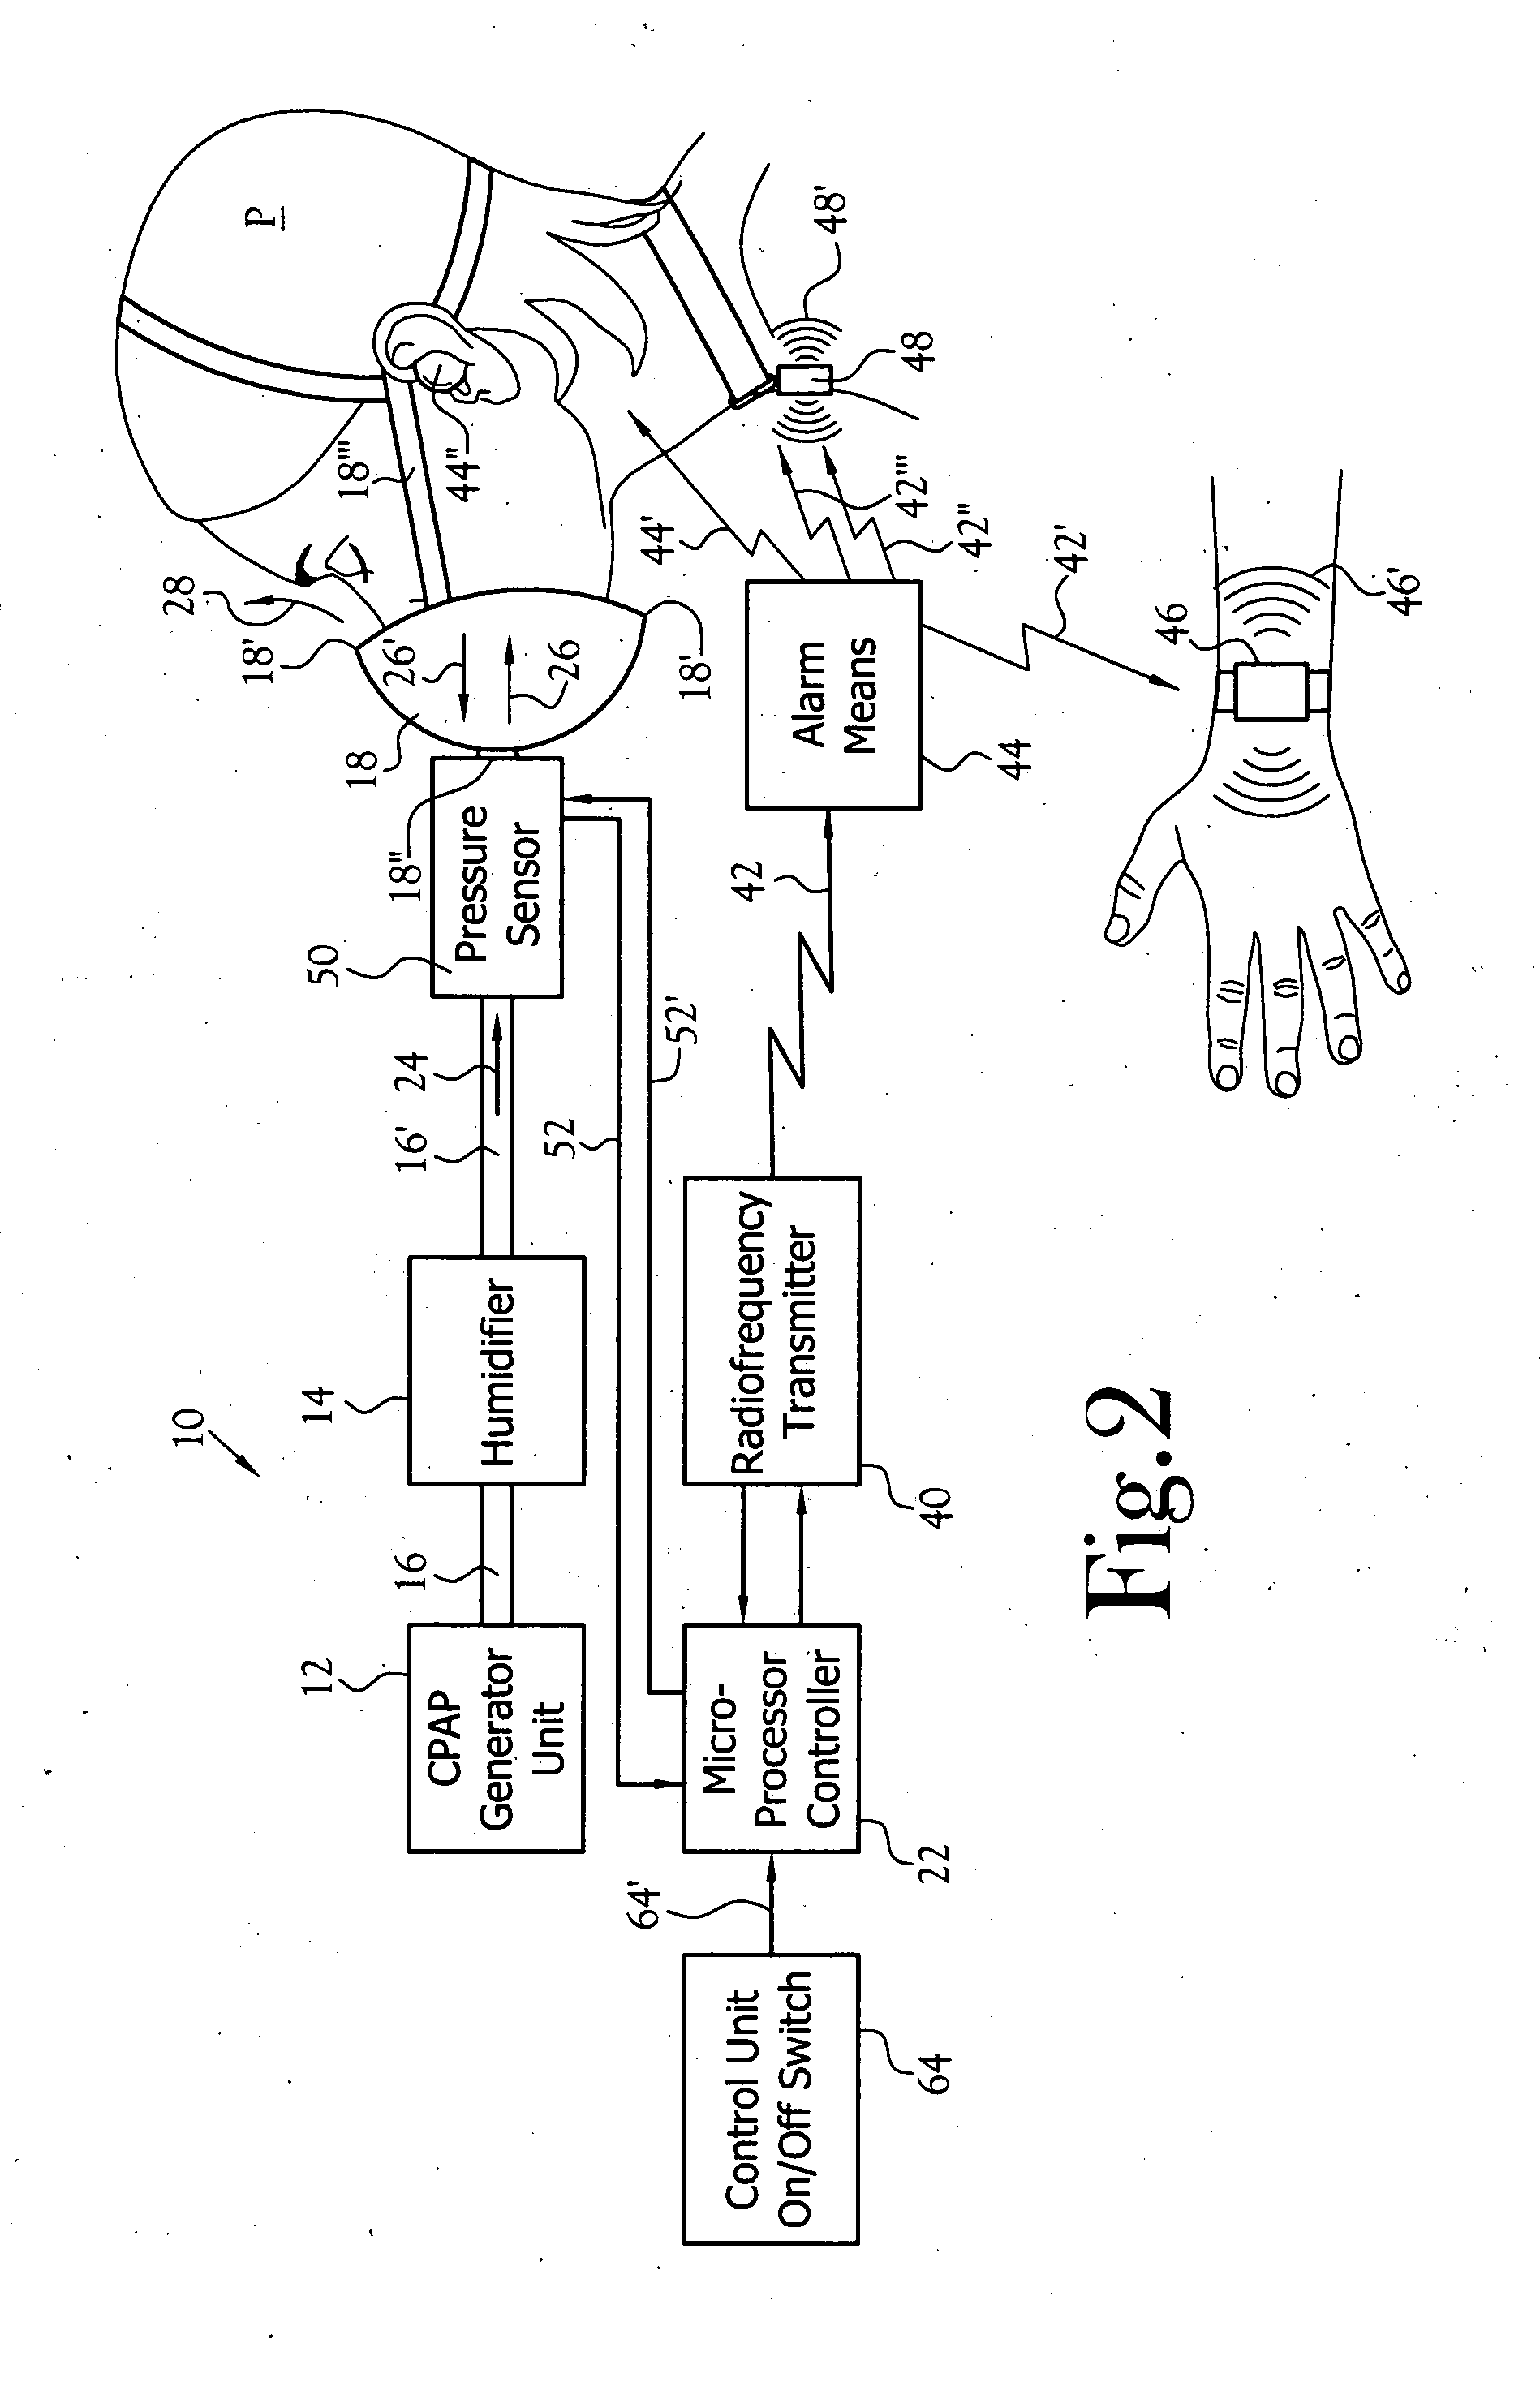 Positive airway pressure notification system for treatment of breathing disorders during sleep